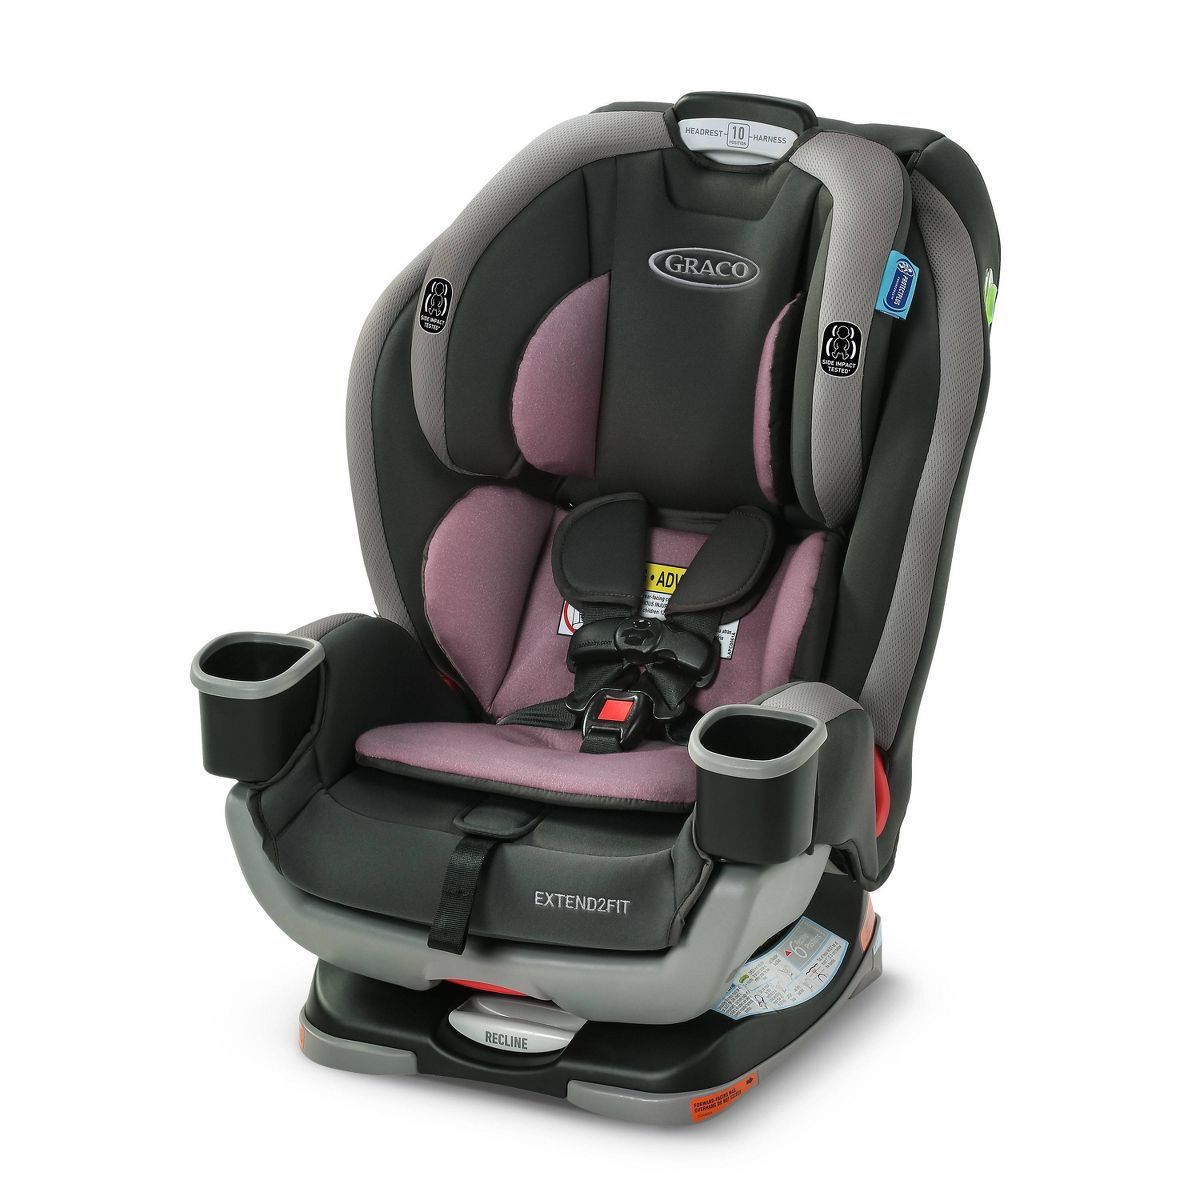 Graco Extend2Fit 3-in-1 Convertible Car Seat | Target